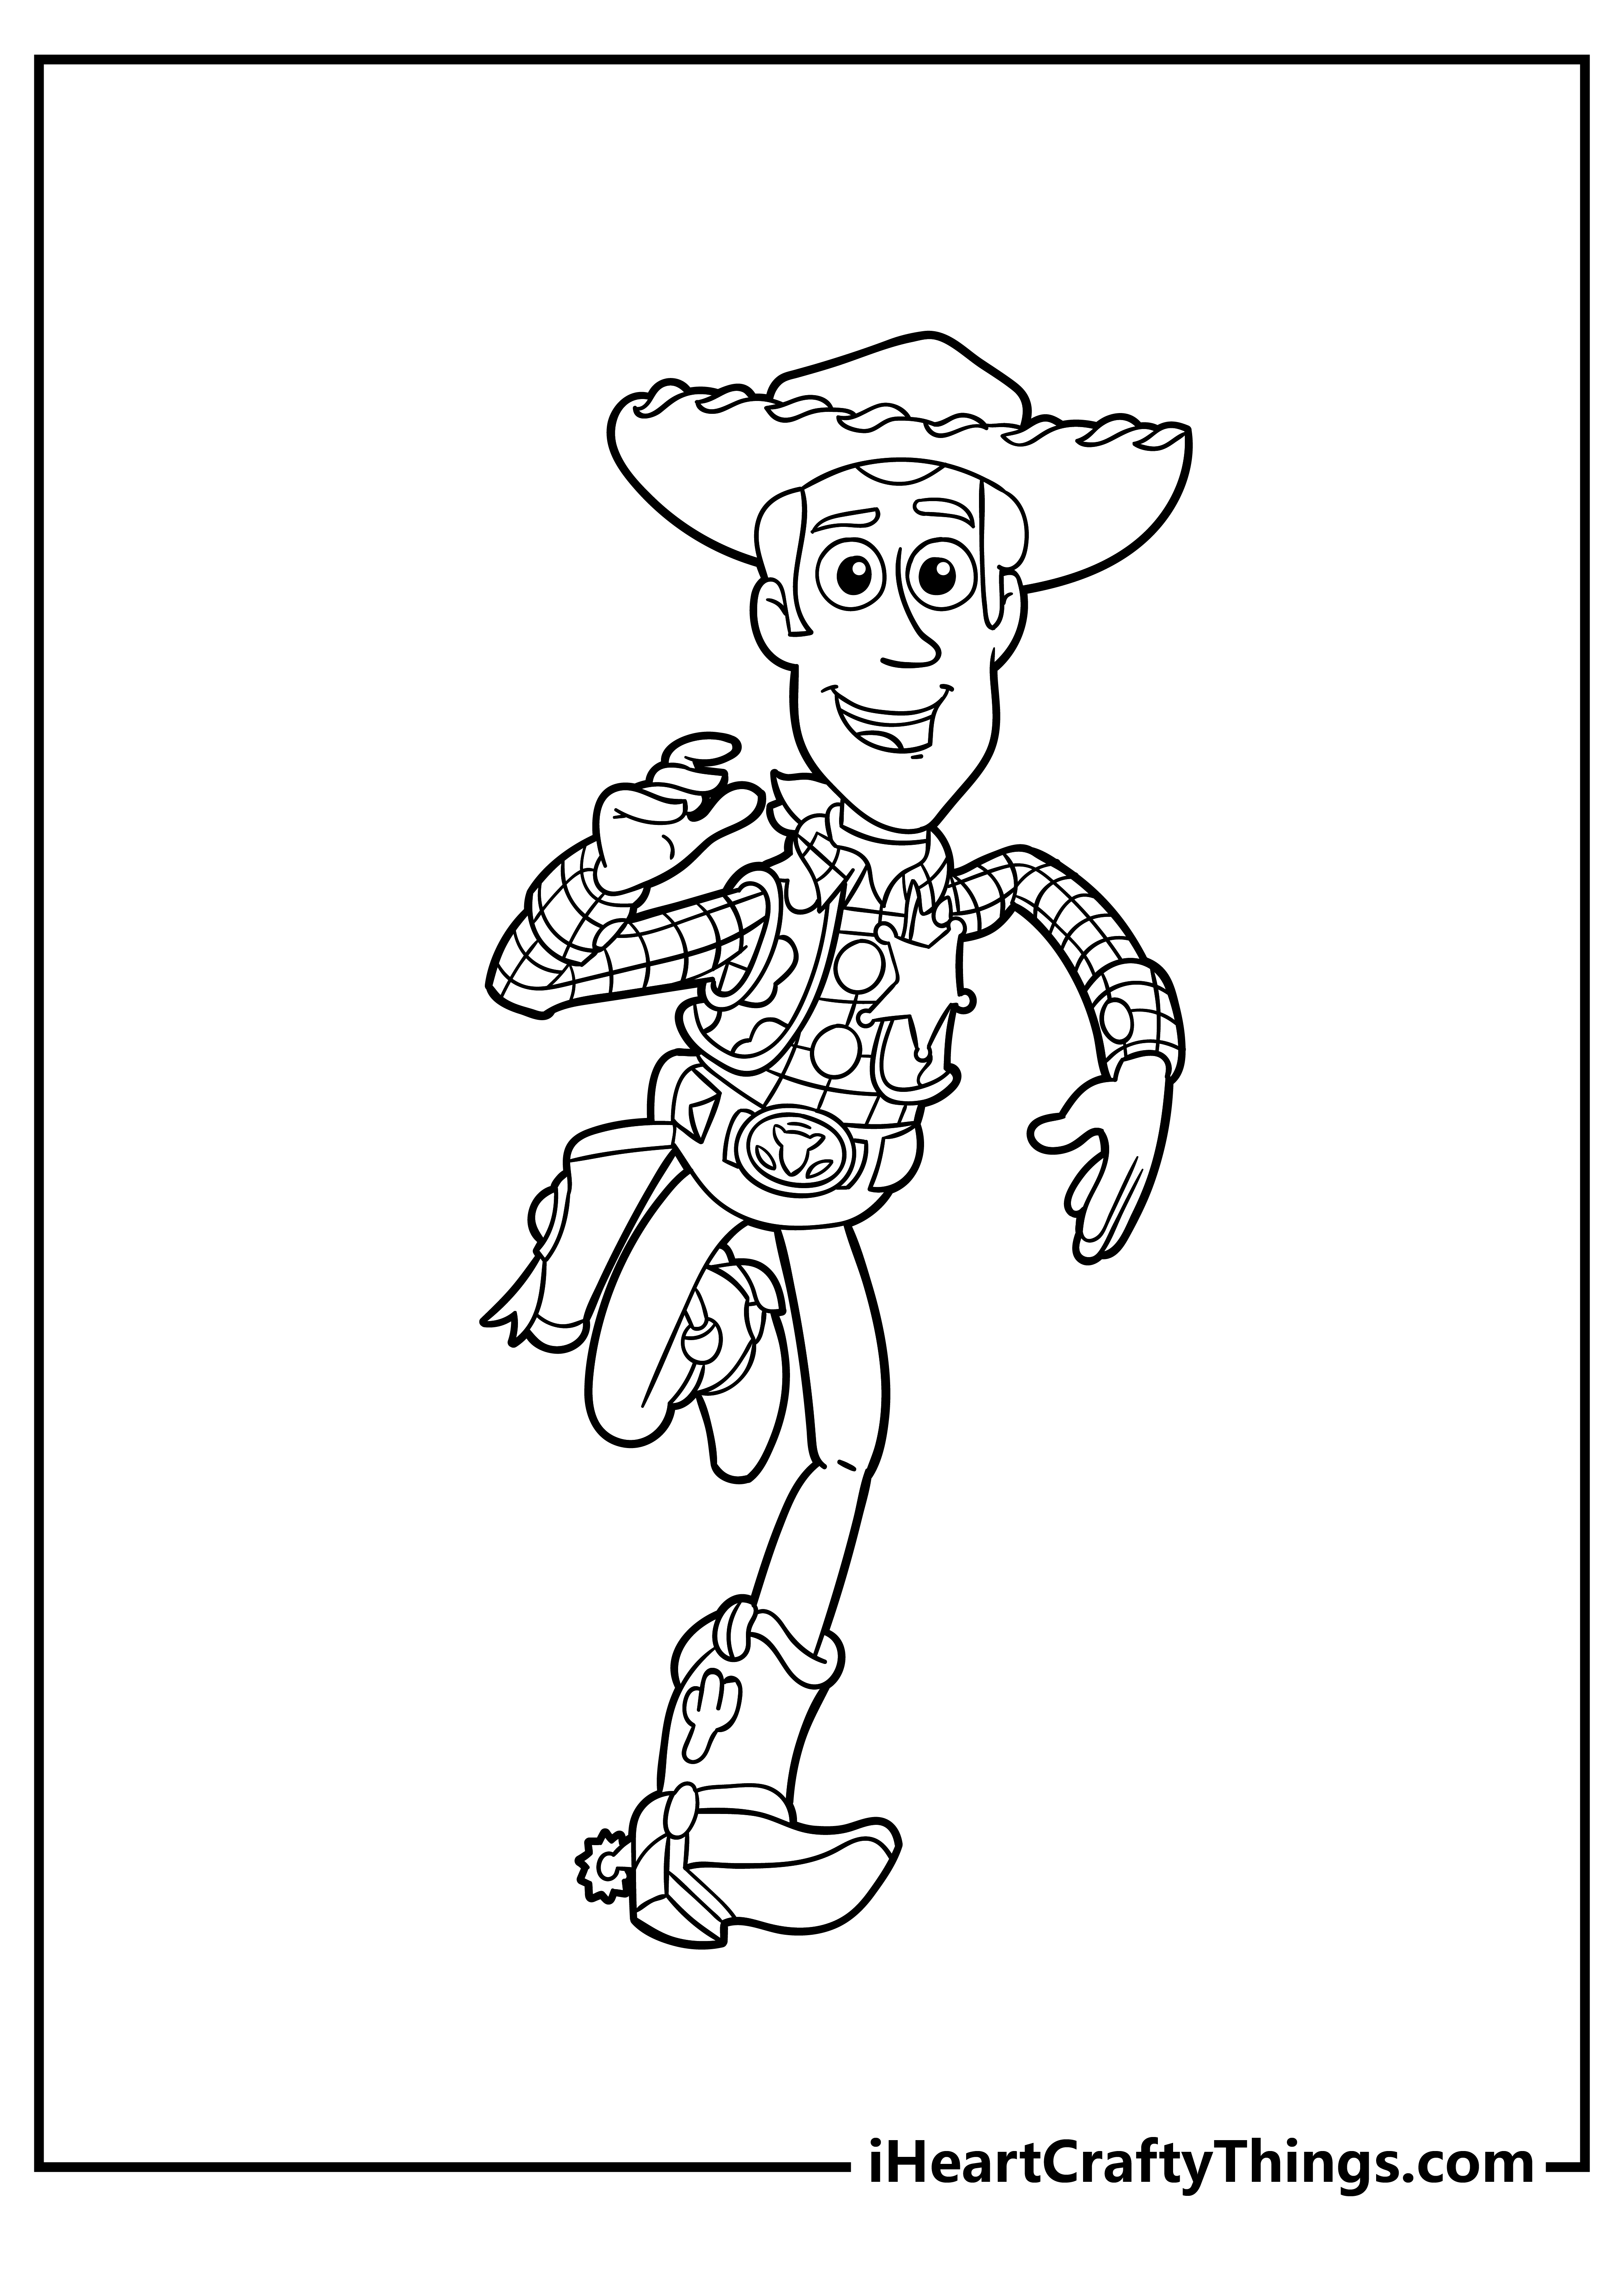 Toy Story Coloring Book for kids free printable